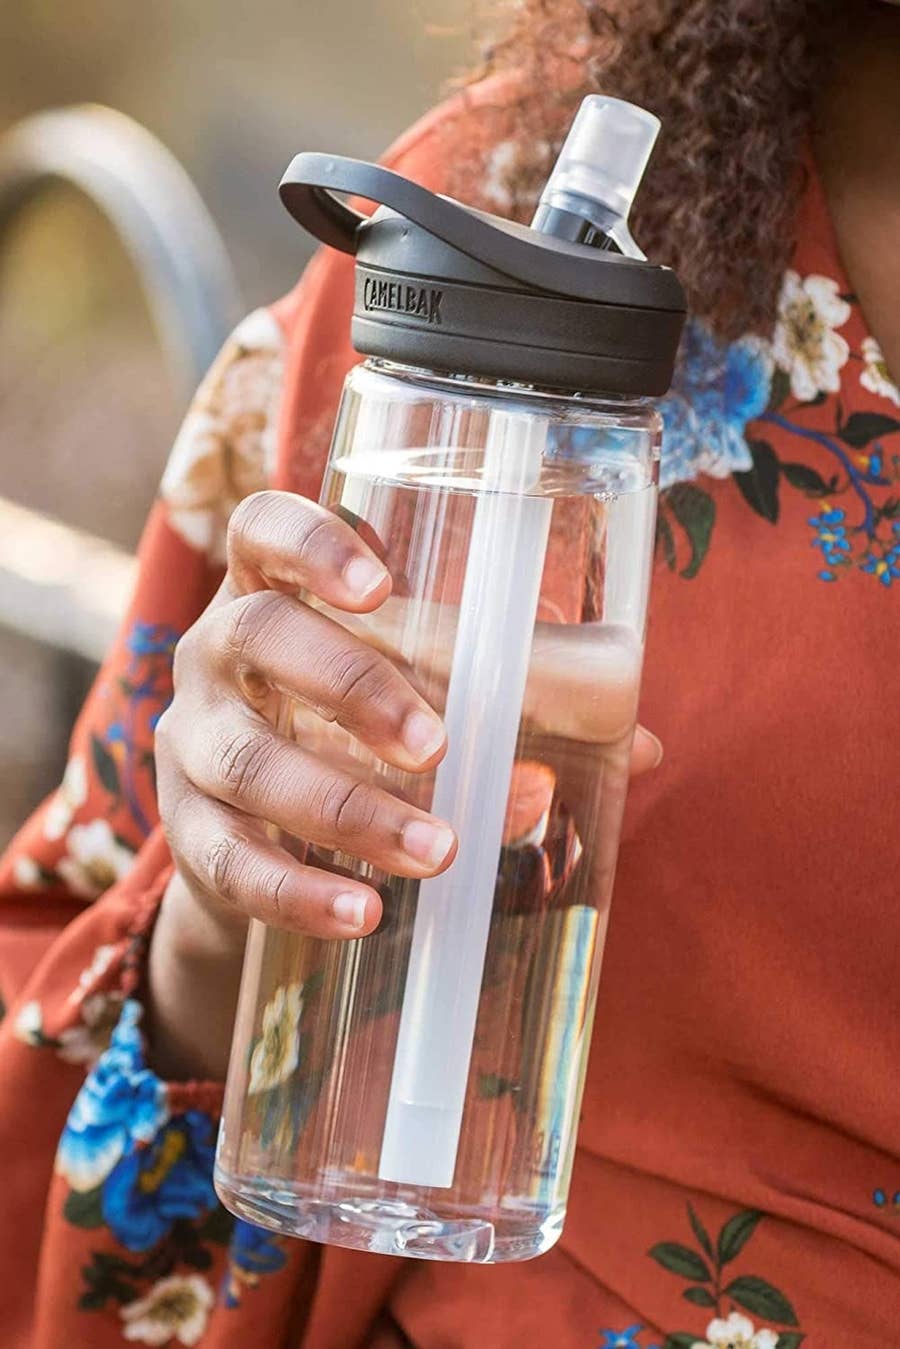 Water Bottles You Need To Try. In a world where staying hydrated on…, by  Abdel J